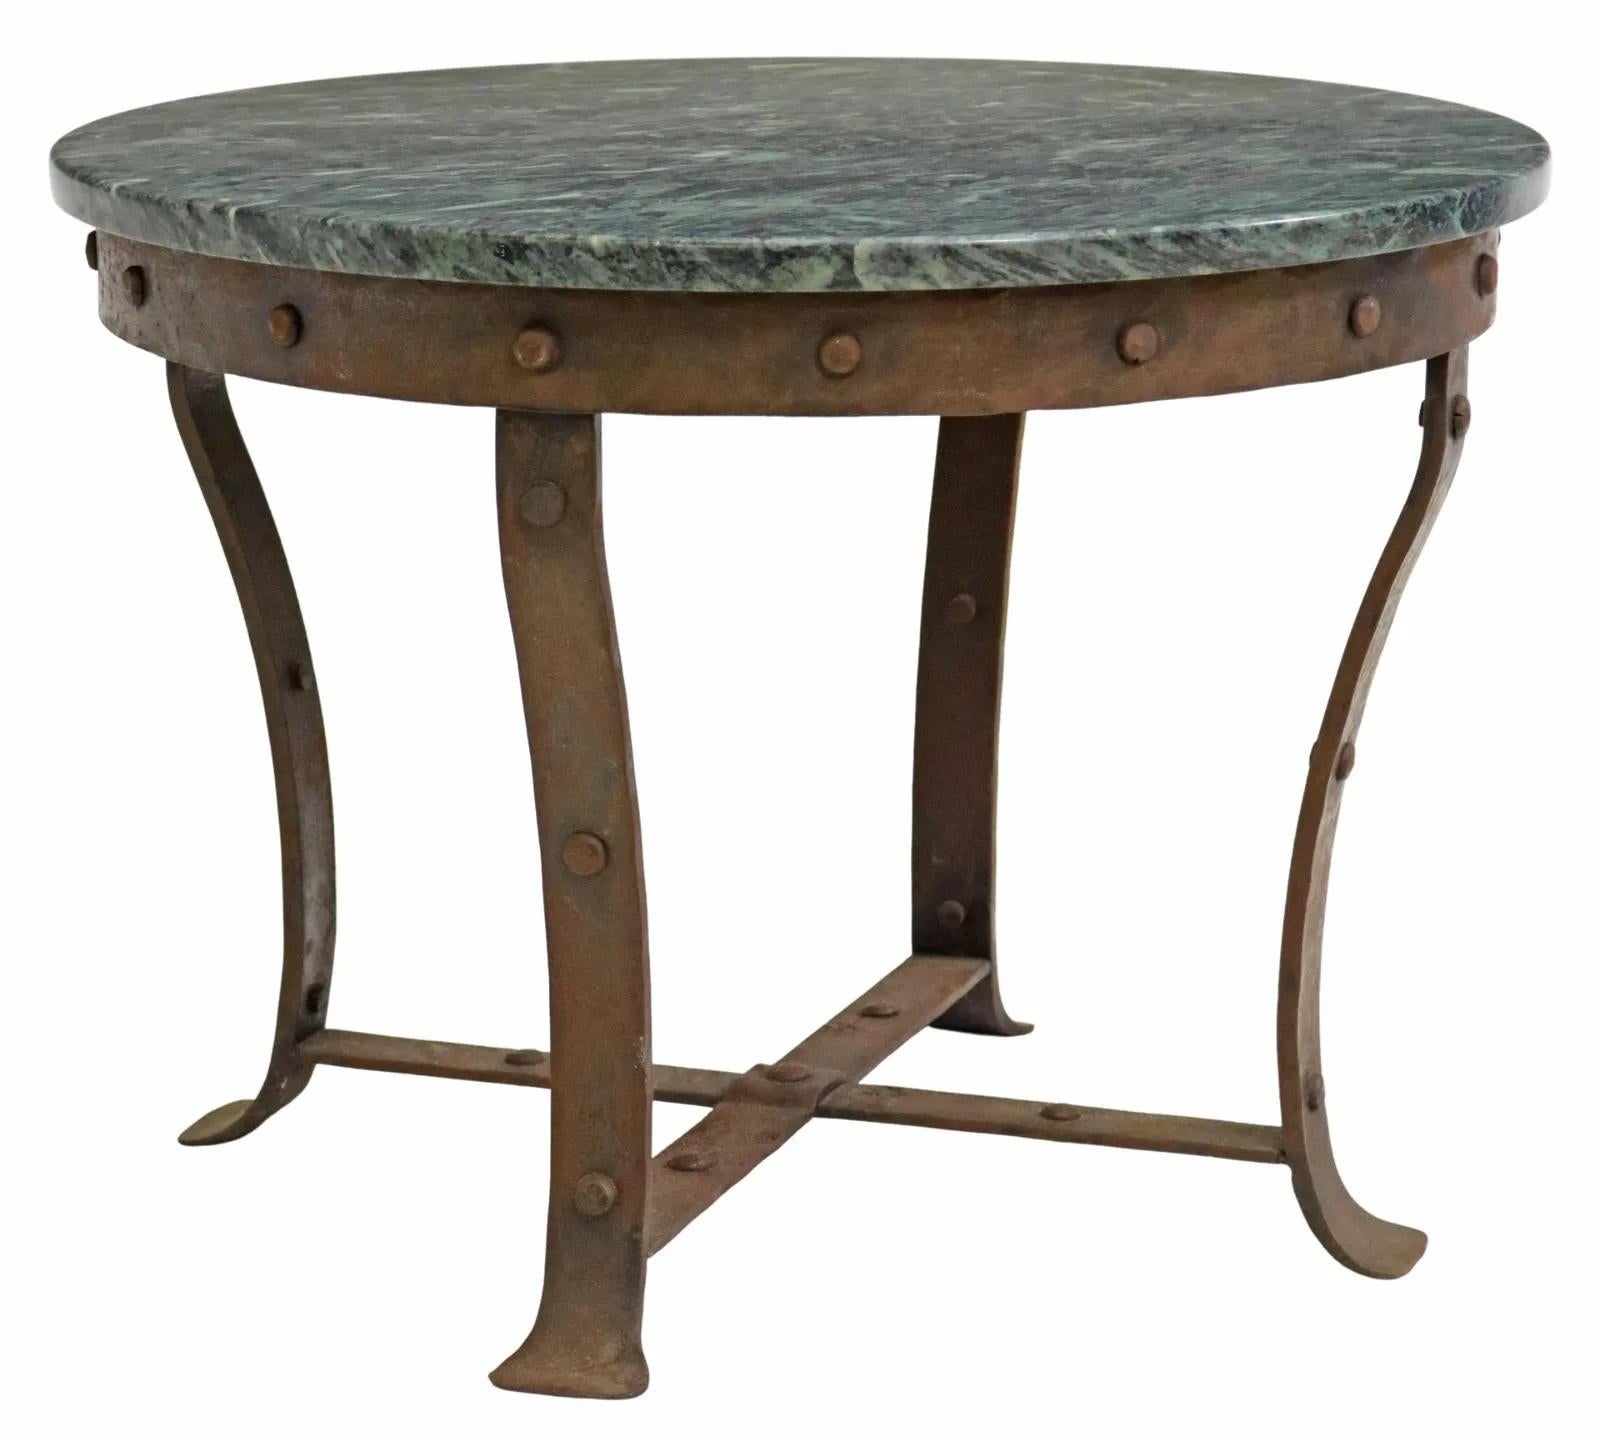 Rustic French marble and iron coffee table, 20th c., having round marble top, over curved stretcher-joined legs, with rivet accents.

Dimensions: approx 18.25